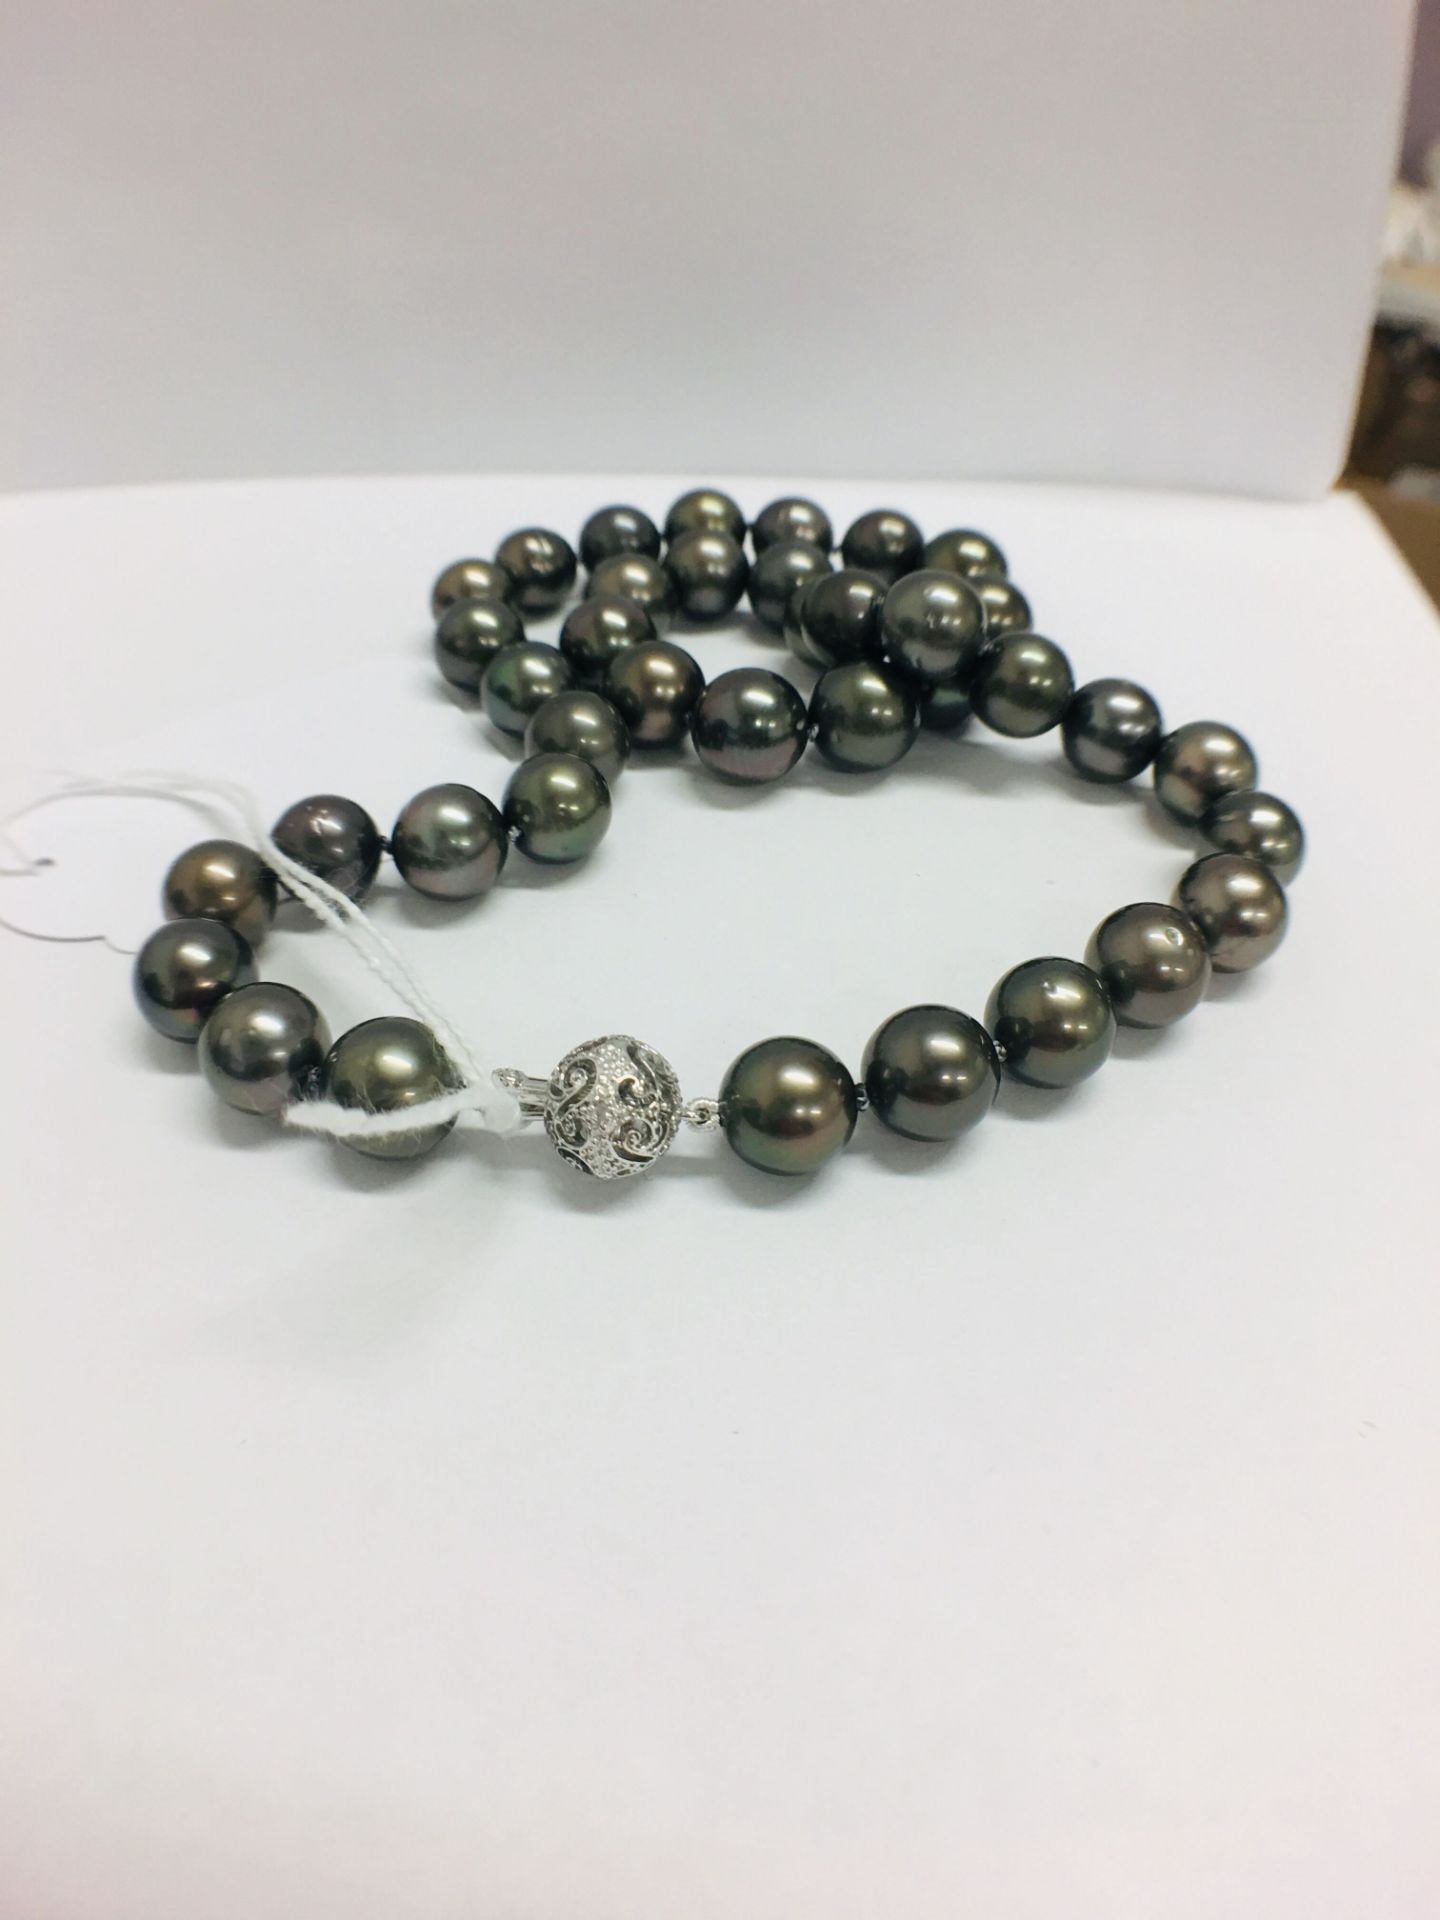 Tahitian Pearl Necklace - Image 5 of 9